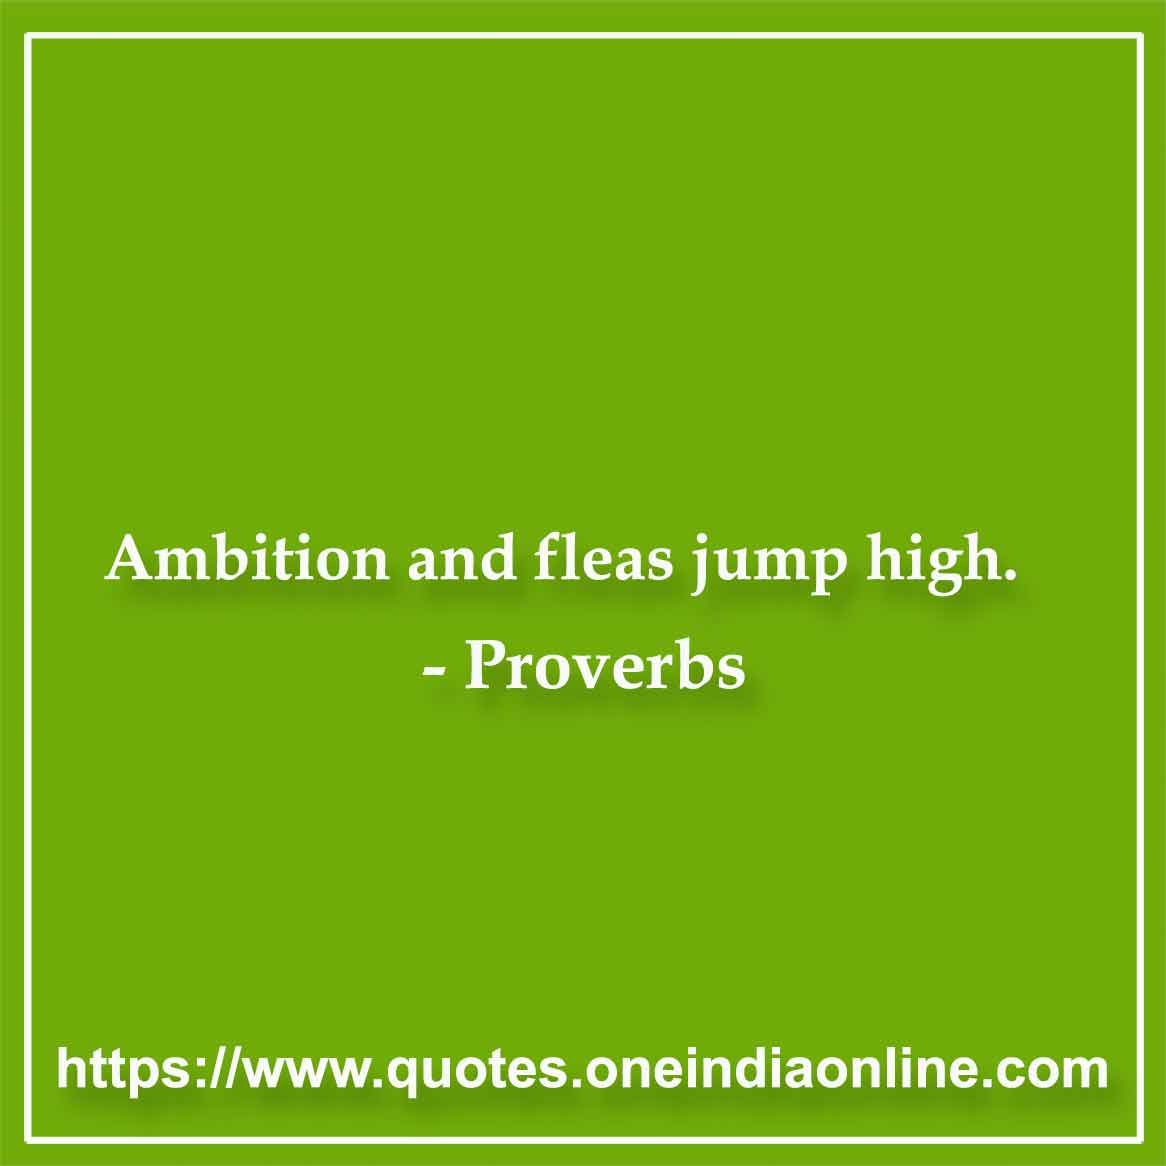 Ambition and fleas jump high.

- German 